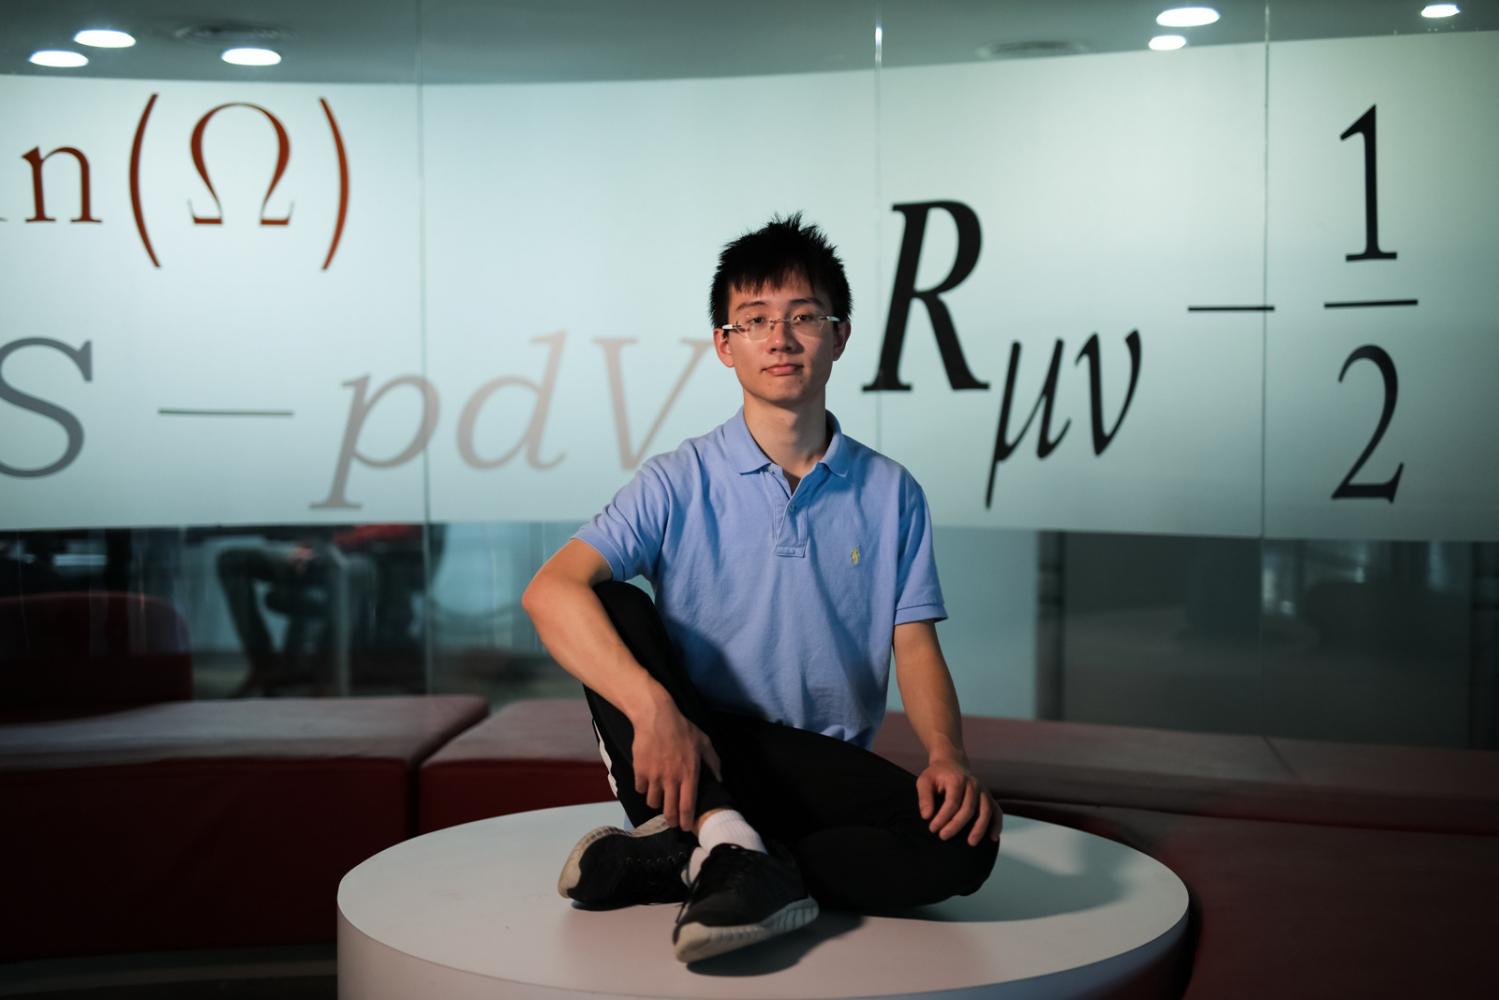 Yuan Cao, a researcher of graphene at MIT in Cambridge, MA, poses for a portrait at the Weizmann Institute in Rehovot, Israel, November 20th, 2018.